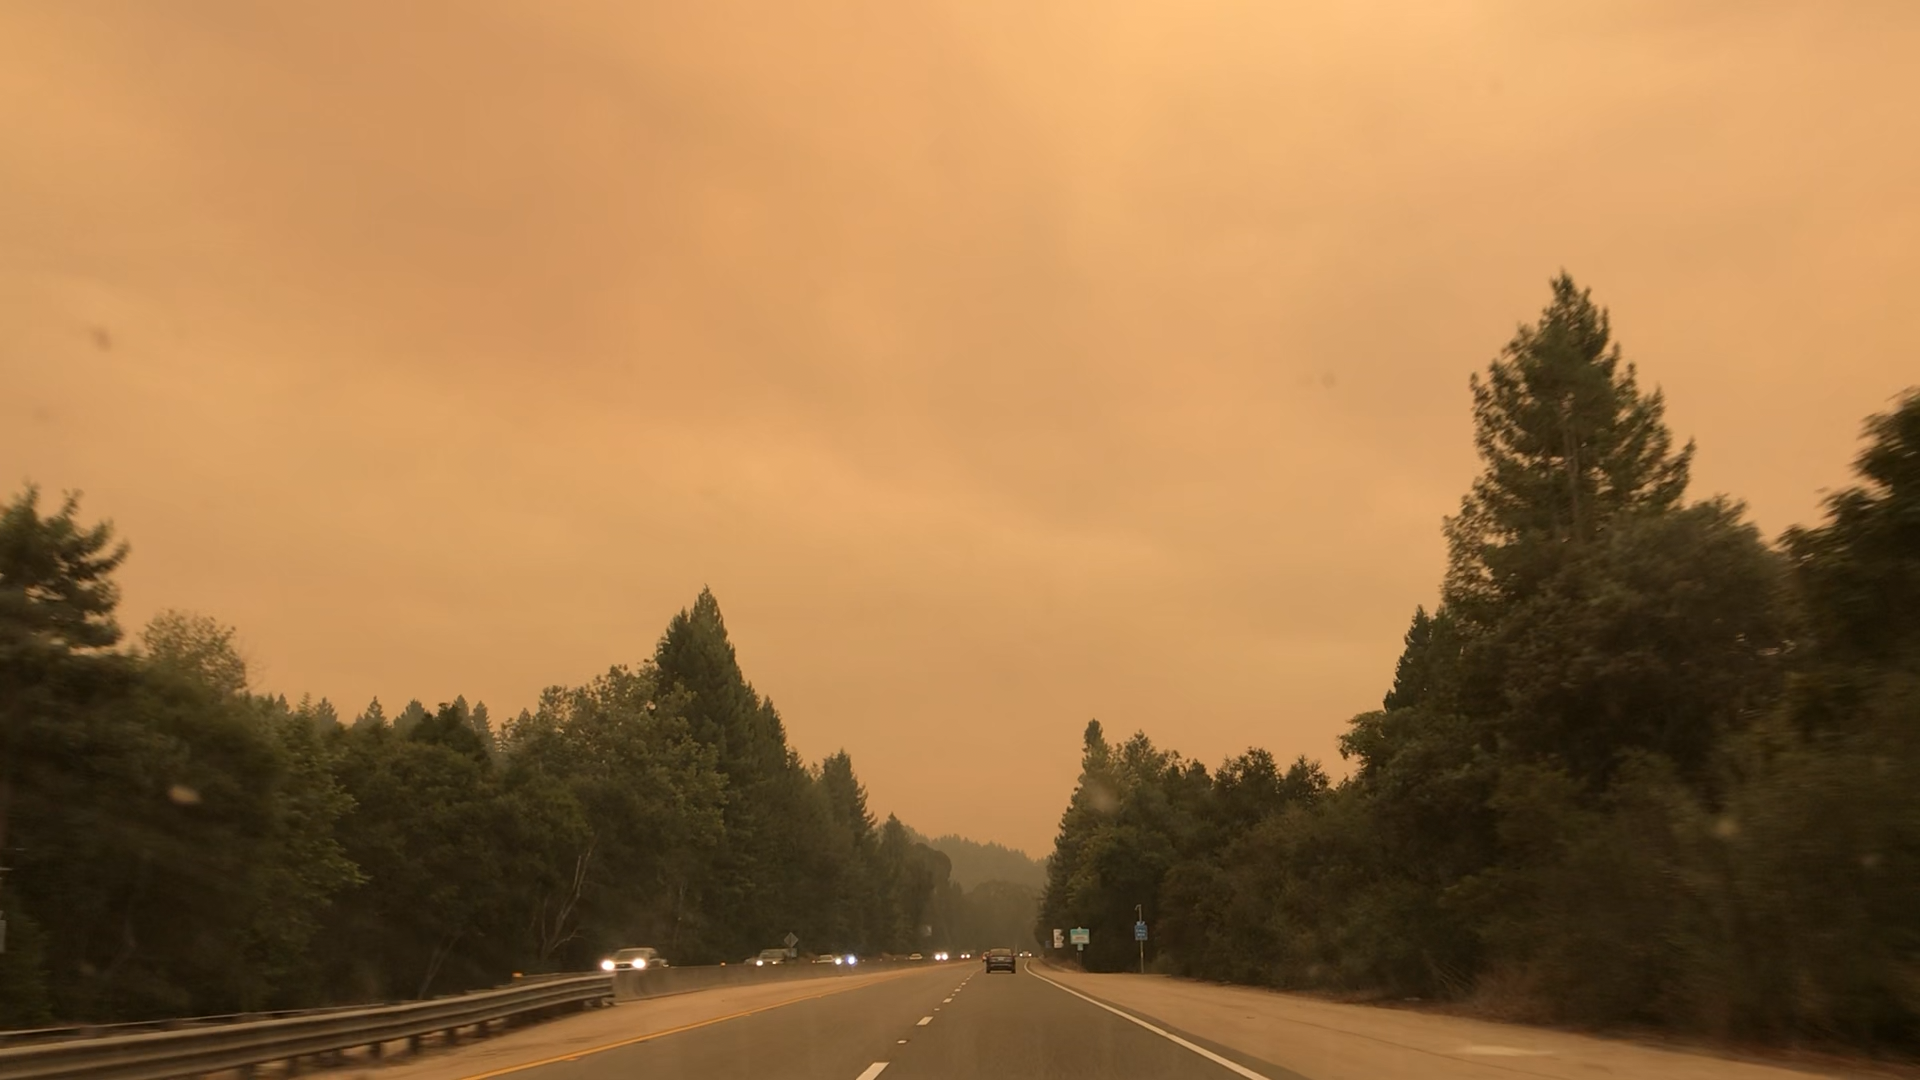 Highway 17 on August 19th, 2020.